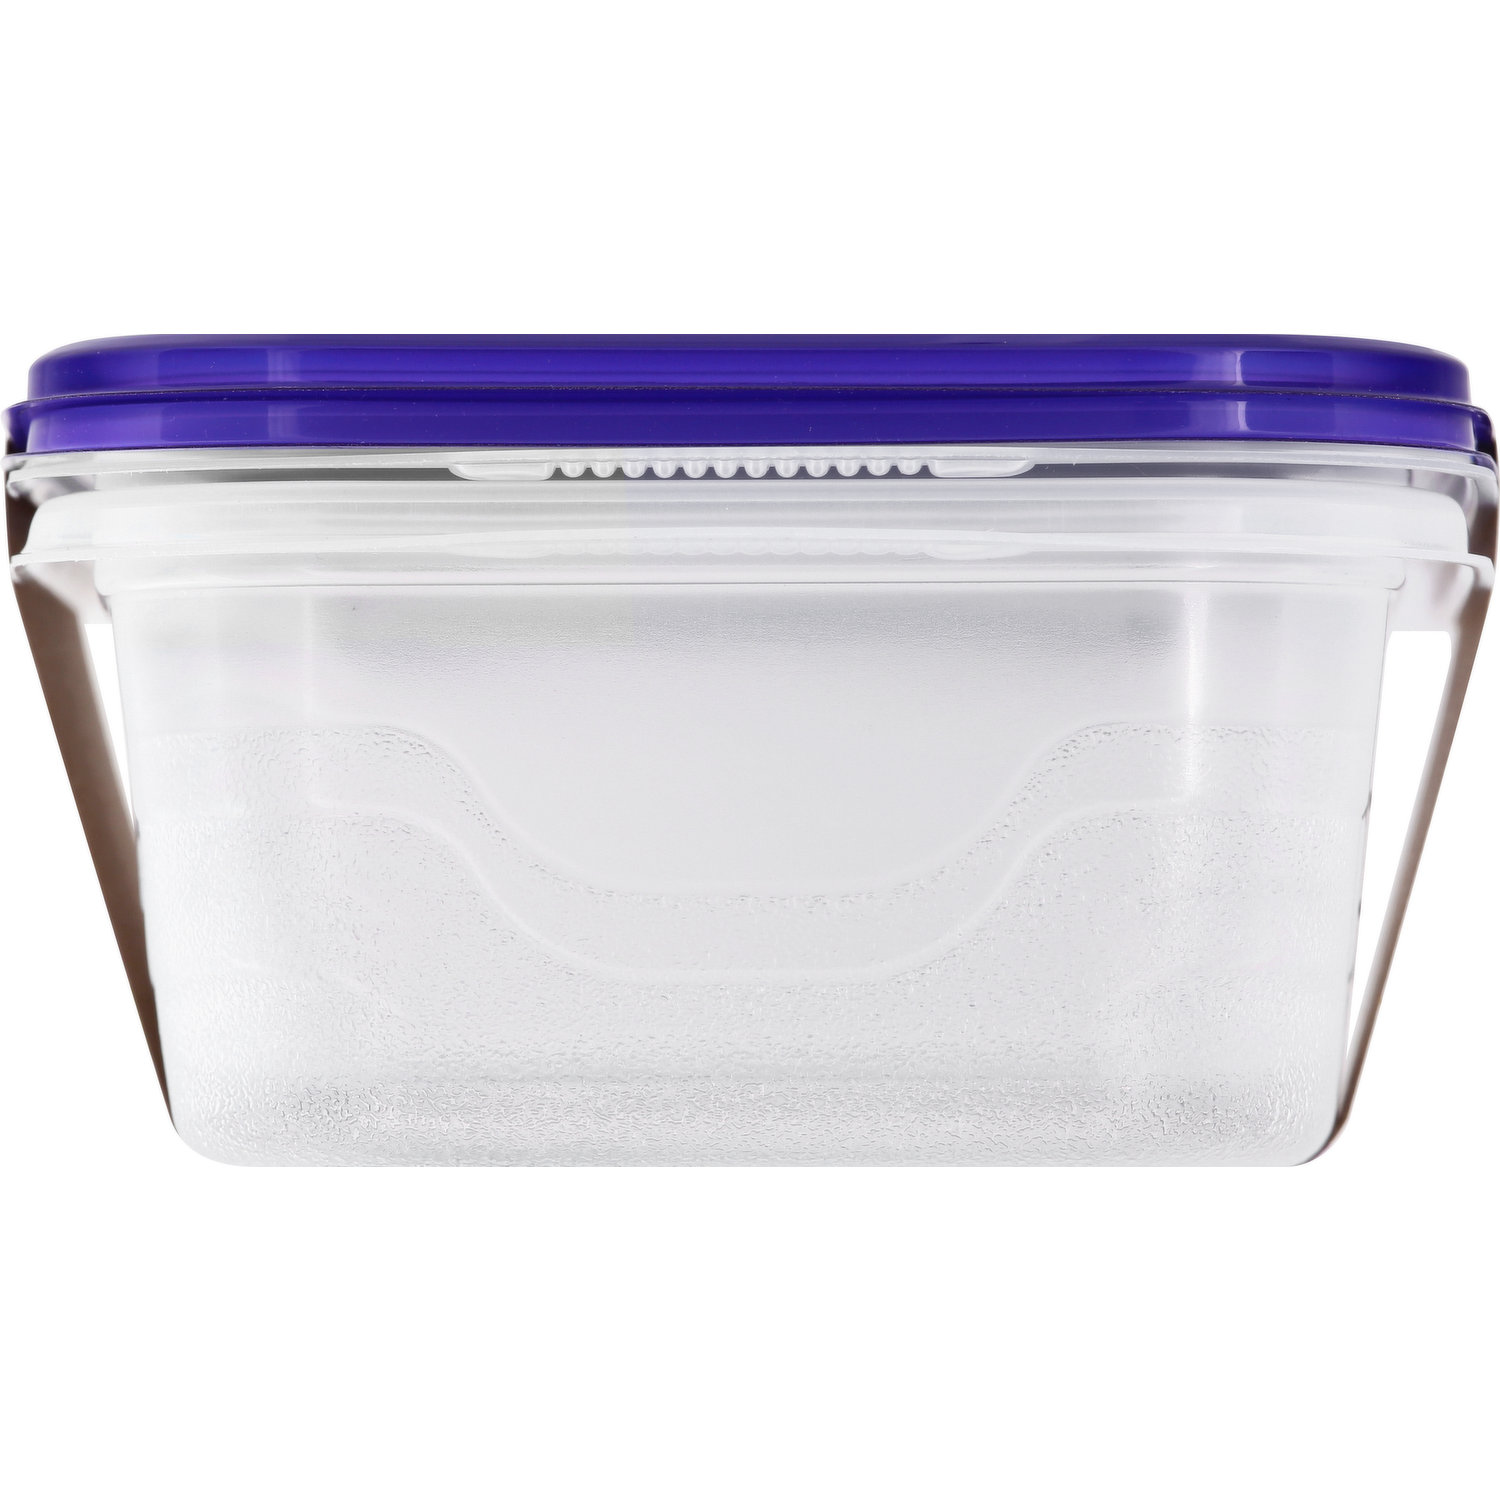 Essential Everyday Reusable Containers, Divided Entree, 24 Fluid Ounce, Food Storage